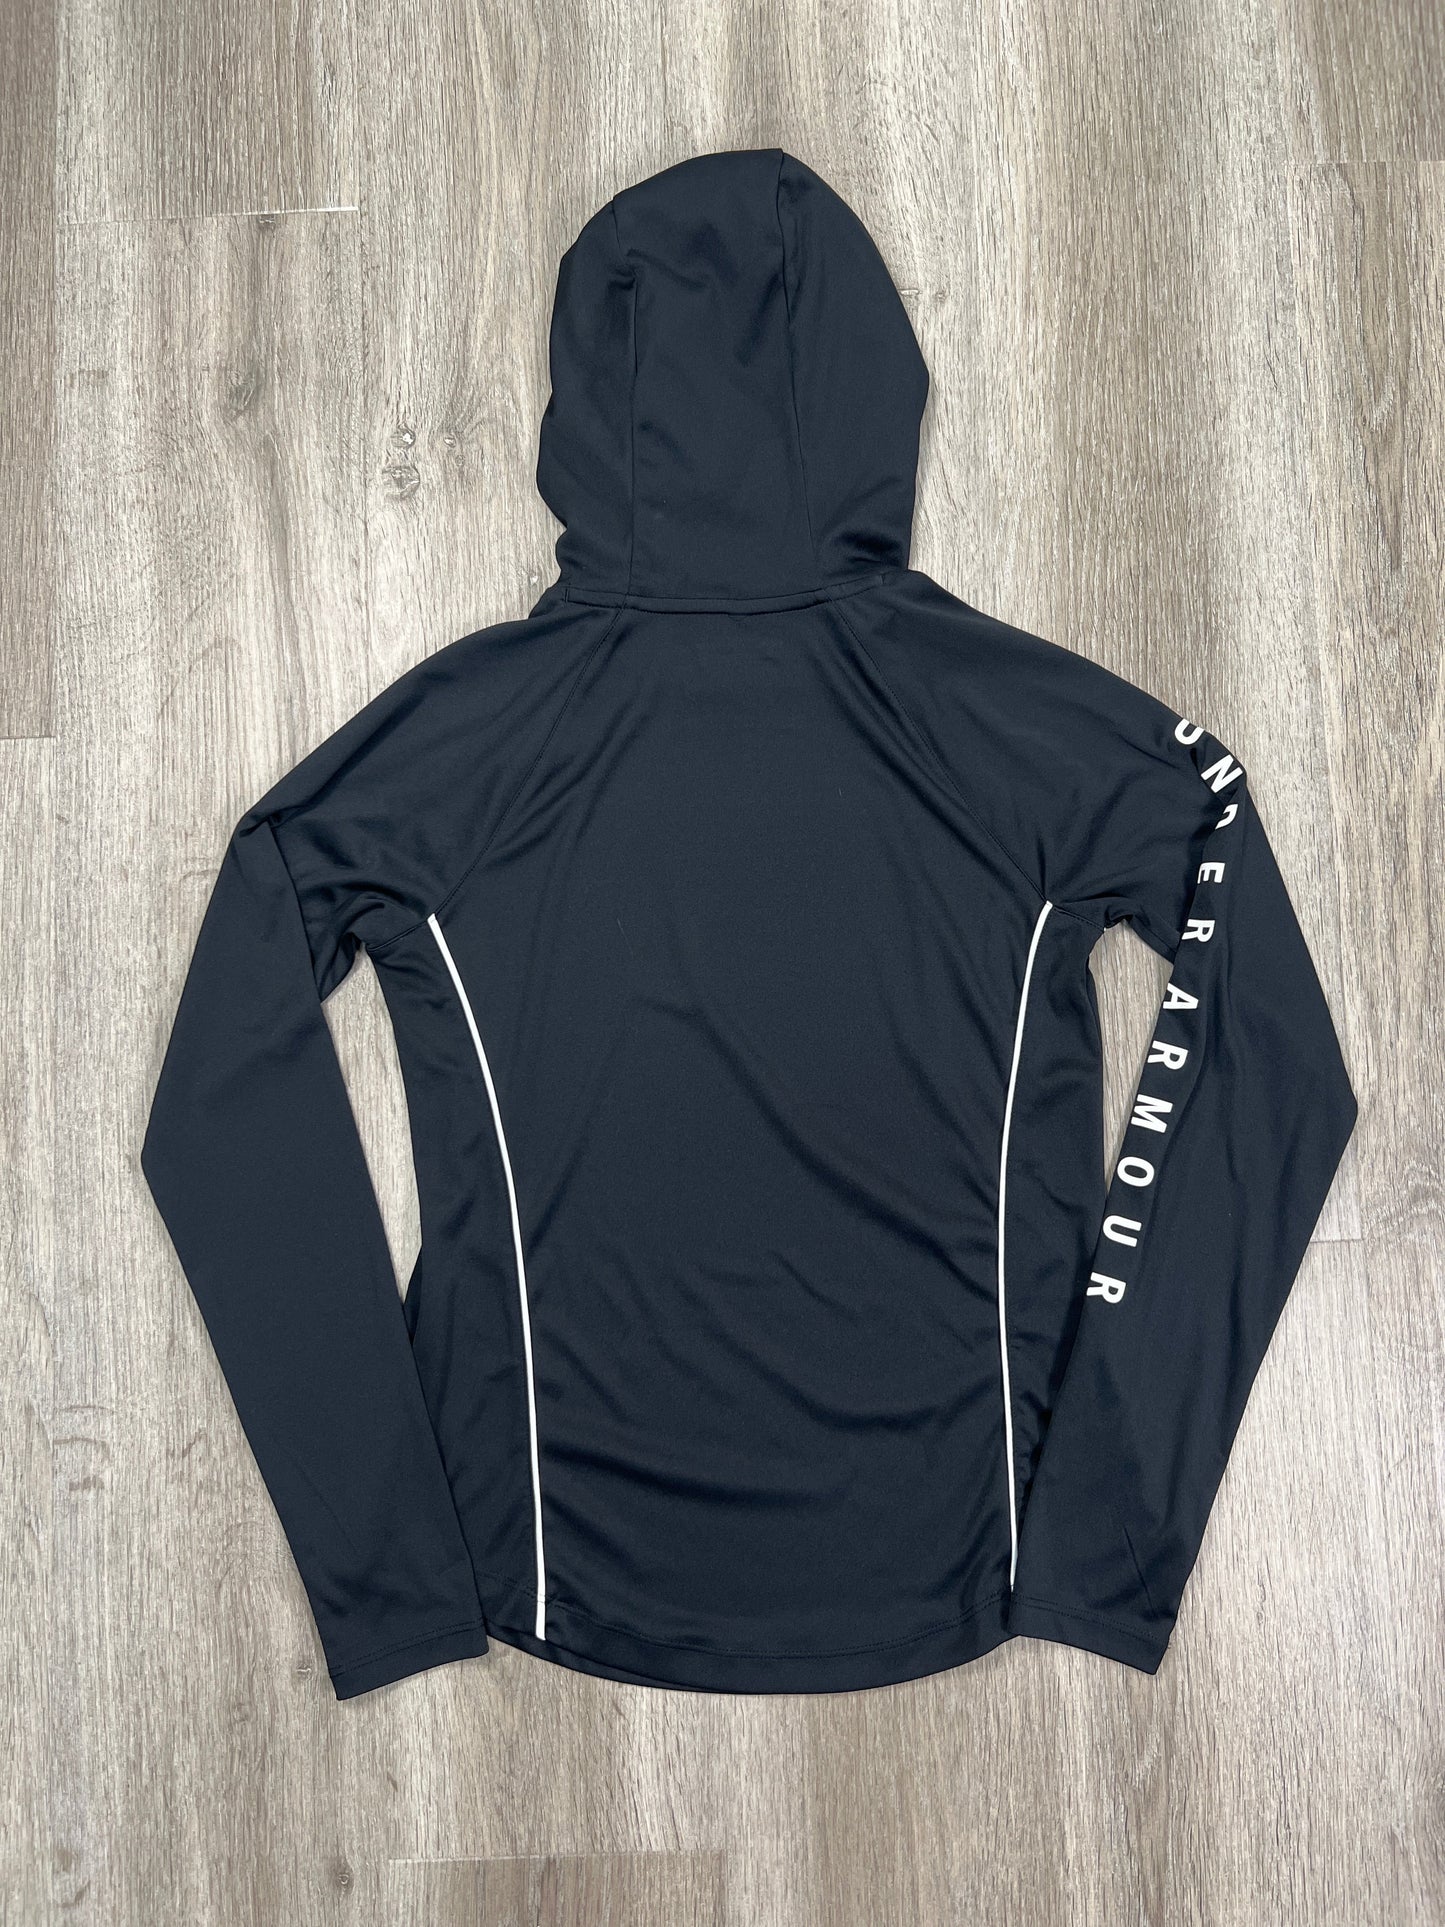 Athletic Top Long Sleeve Hoodie By Under Armour  Size: Xs